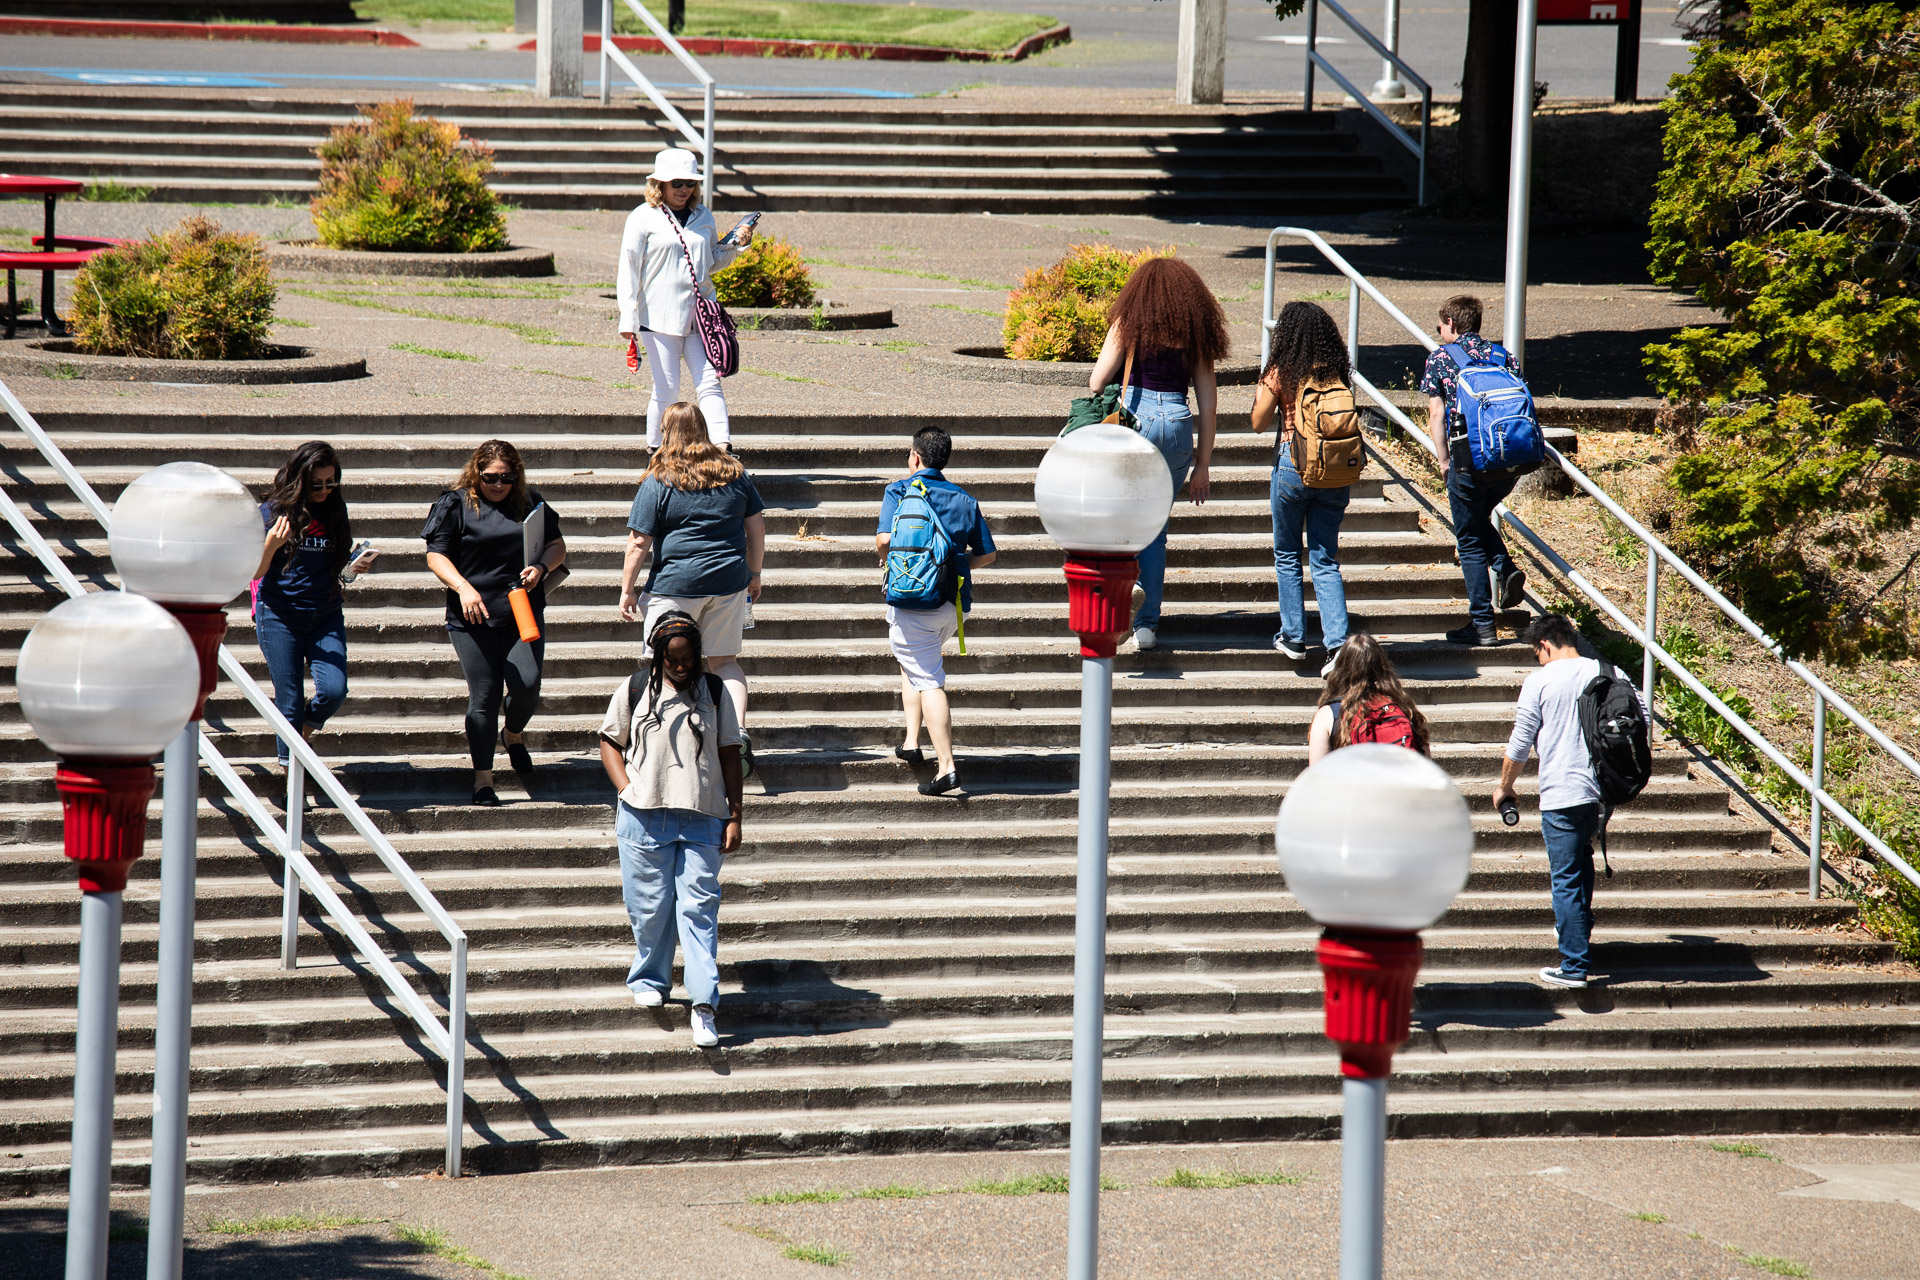 Students on campus